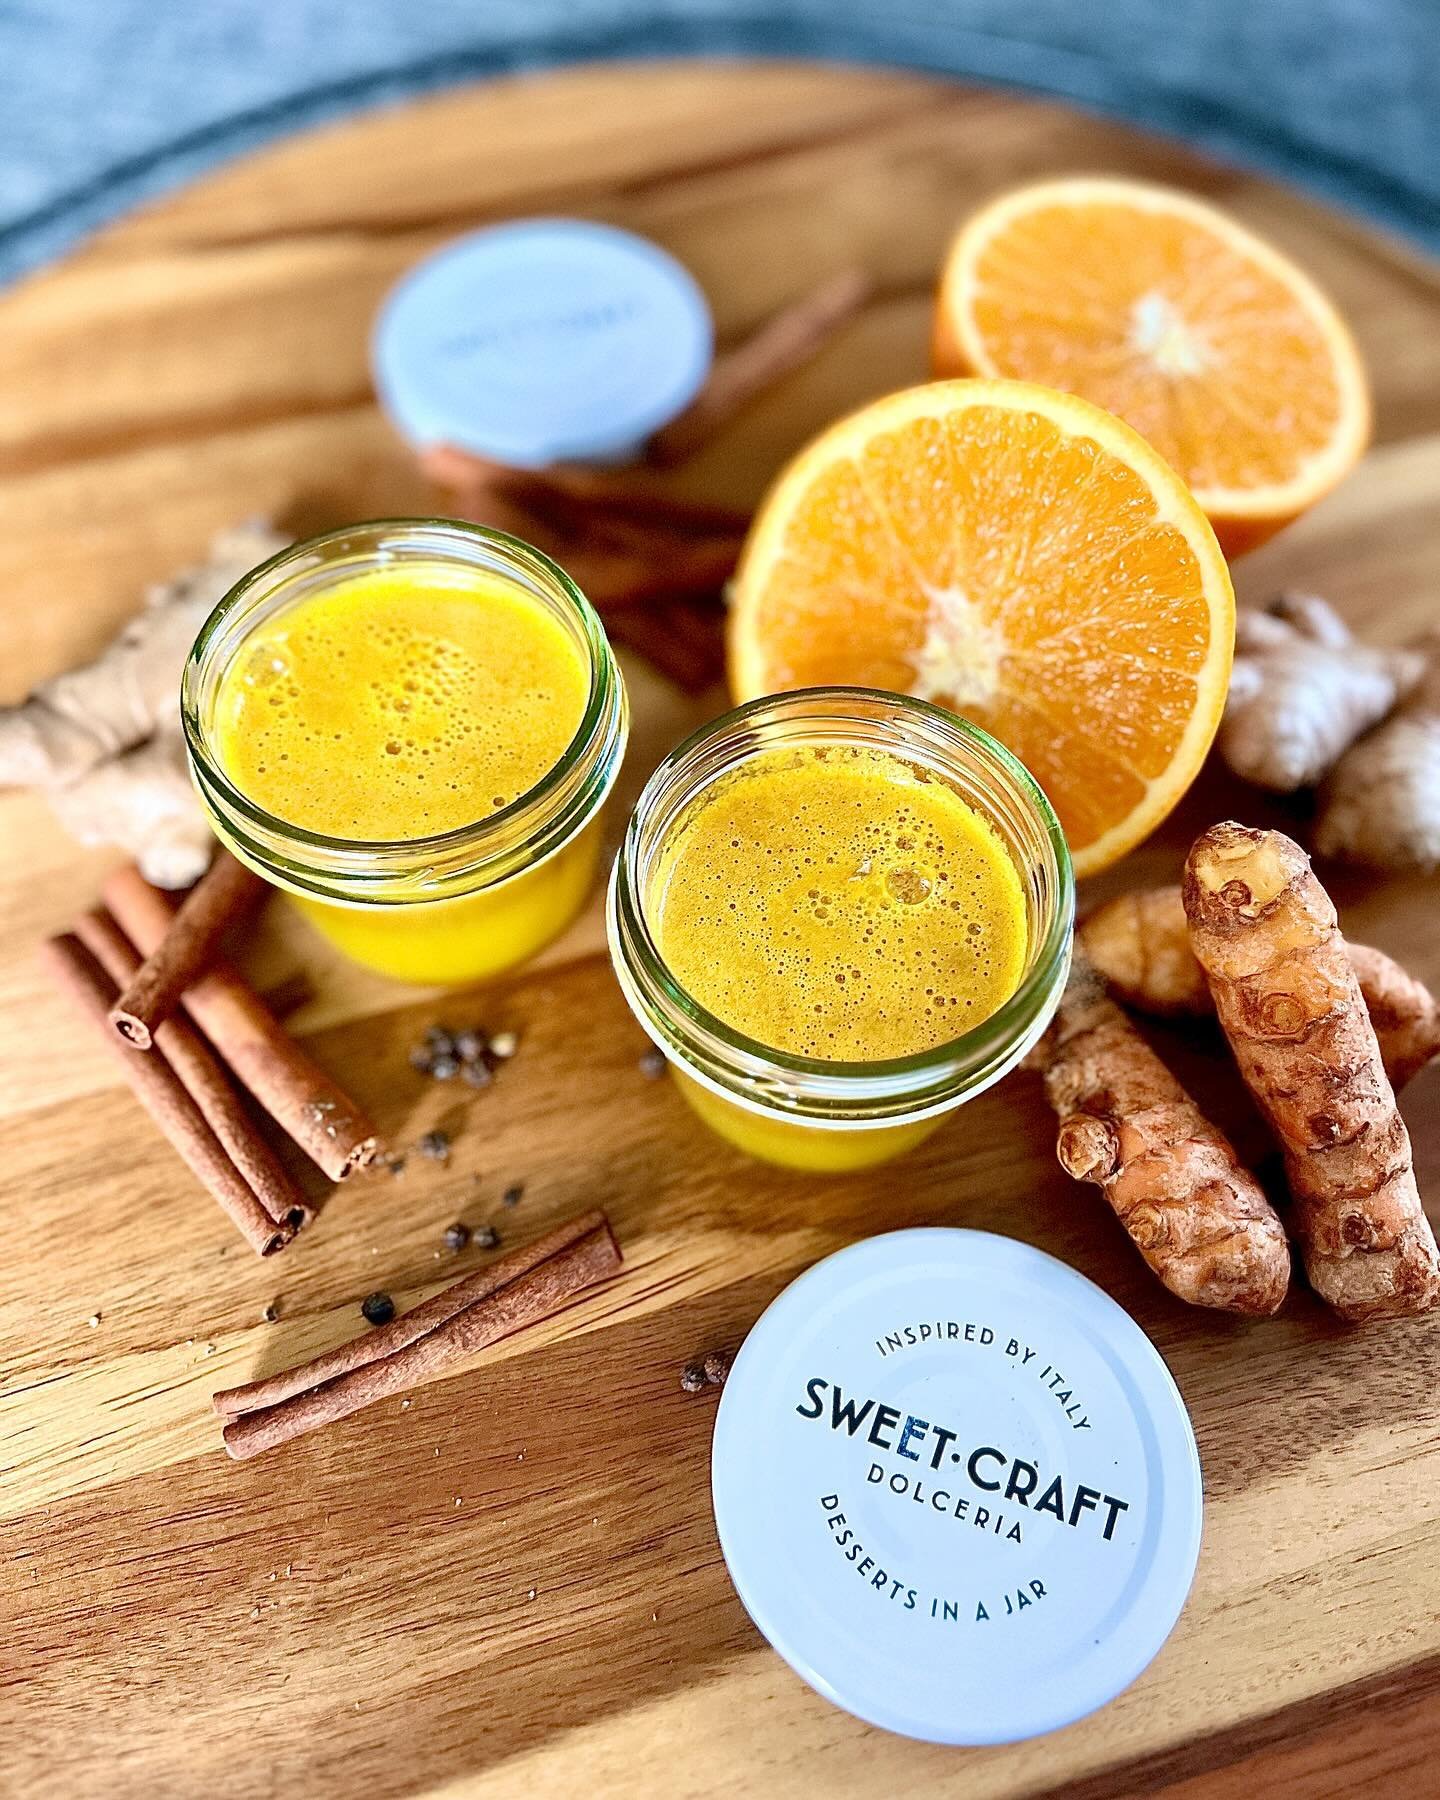 Our glass jars make for endless reusing! This week we made fresh Turmeric shots and stored them in a few of our Sweet Craft jars we had on hand 🫙🫙🫙 Check out the invigorating recipe below 👇🏼 

Turmeric Shots 🫚
 
1 Orange
2 sticks Turmeric
2 sti